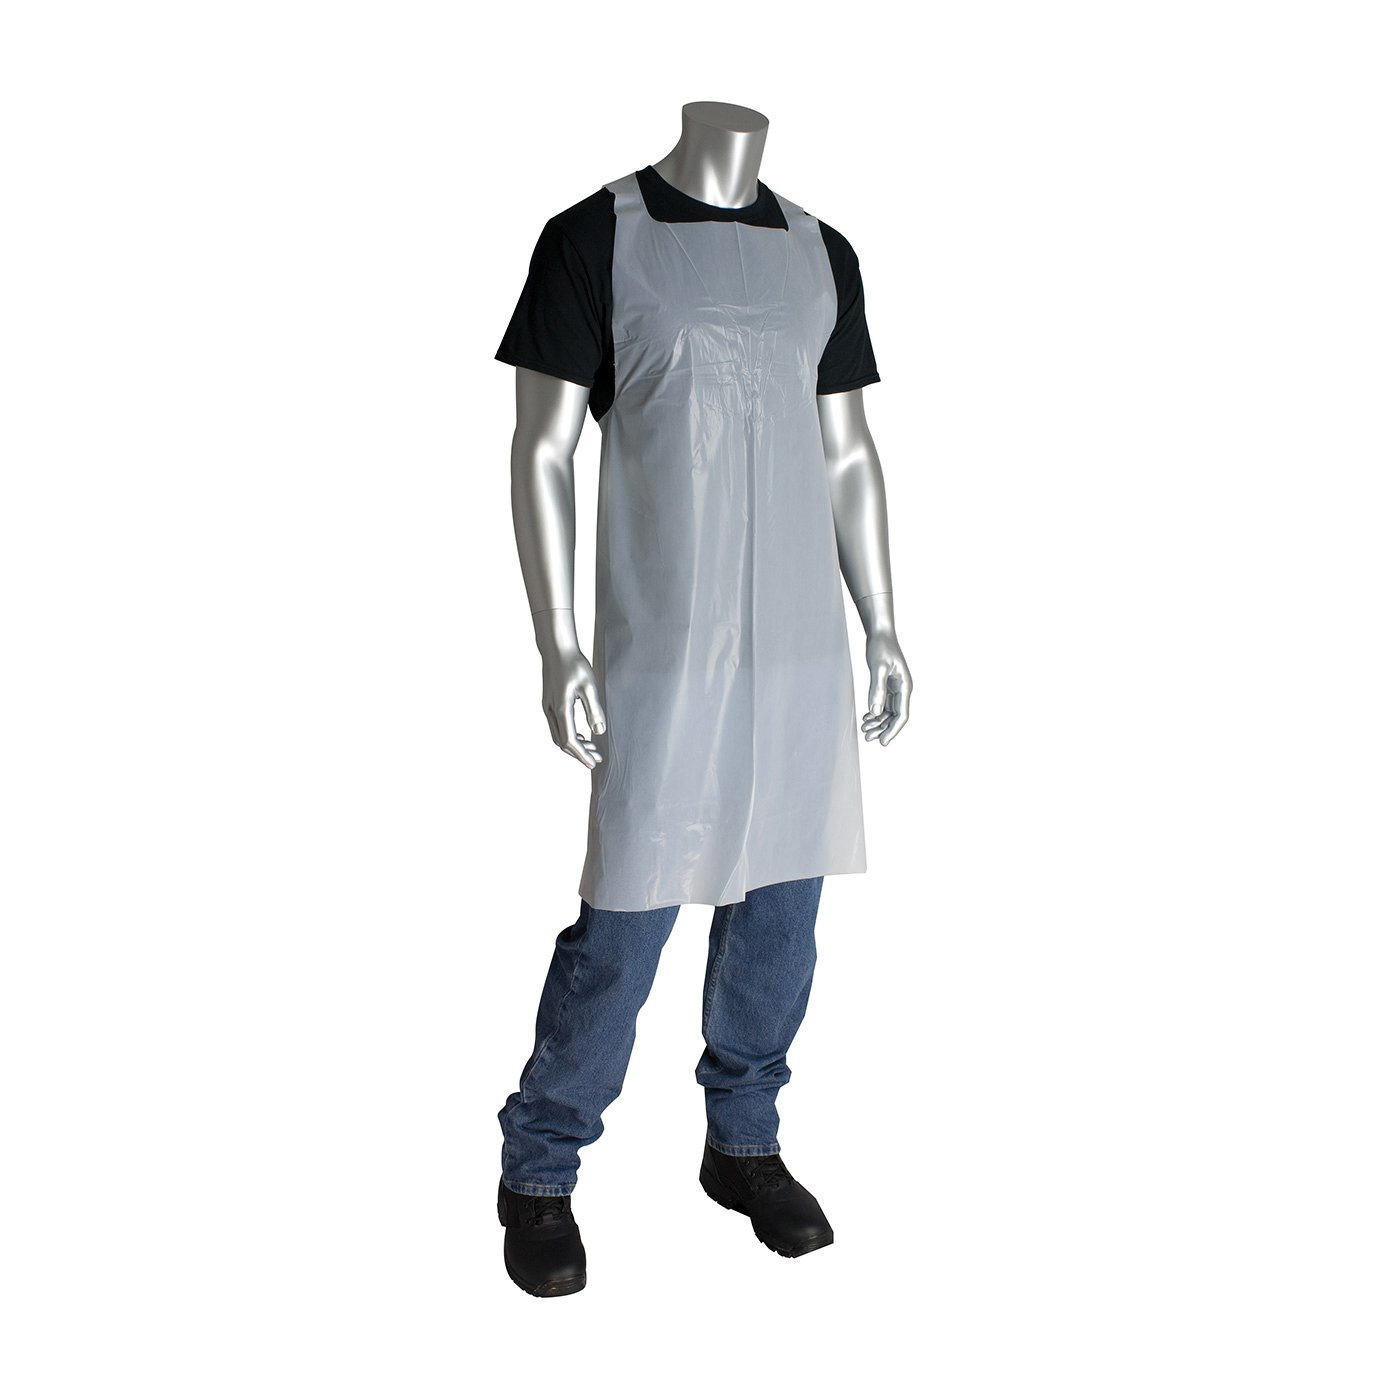 PIP® 200-06002 Single Use Bib Apron, Polyethylene, 46 in L x 28 in W, Resists: Chemical, Fats, Oil and Grease